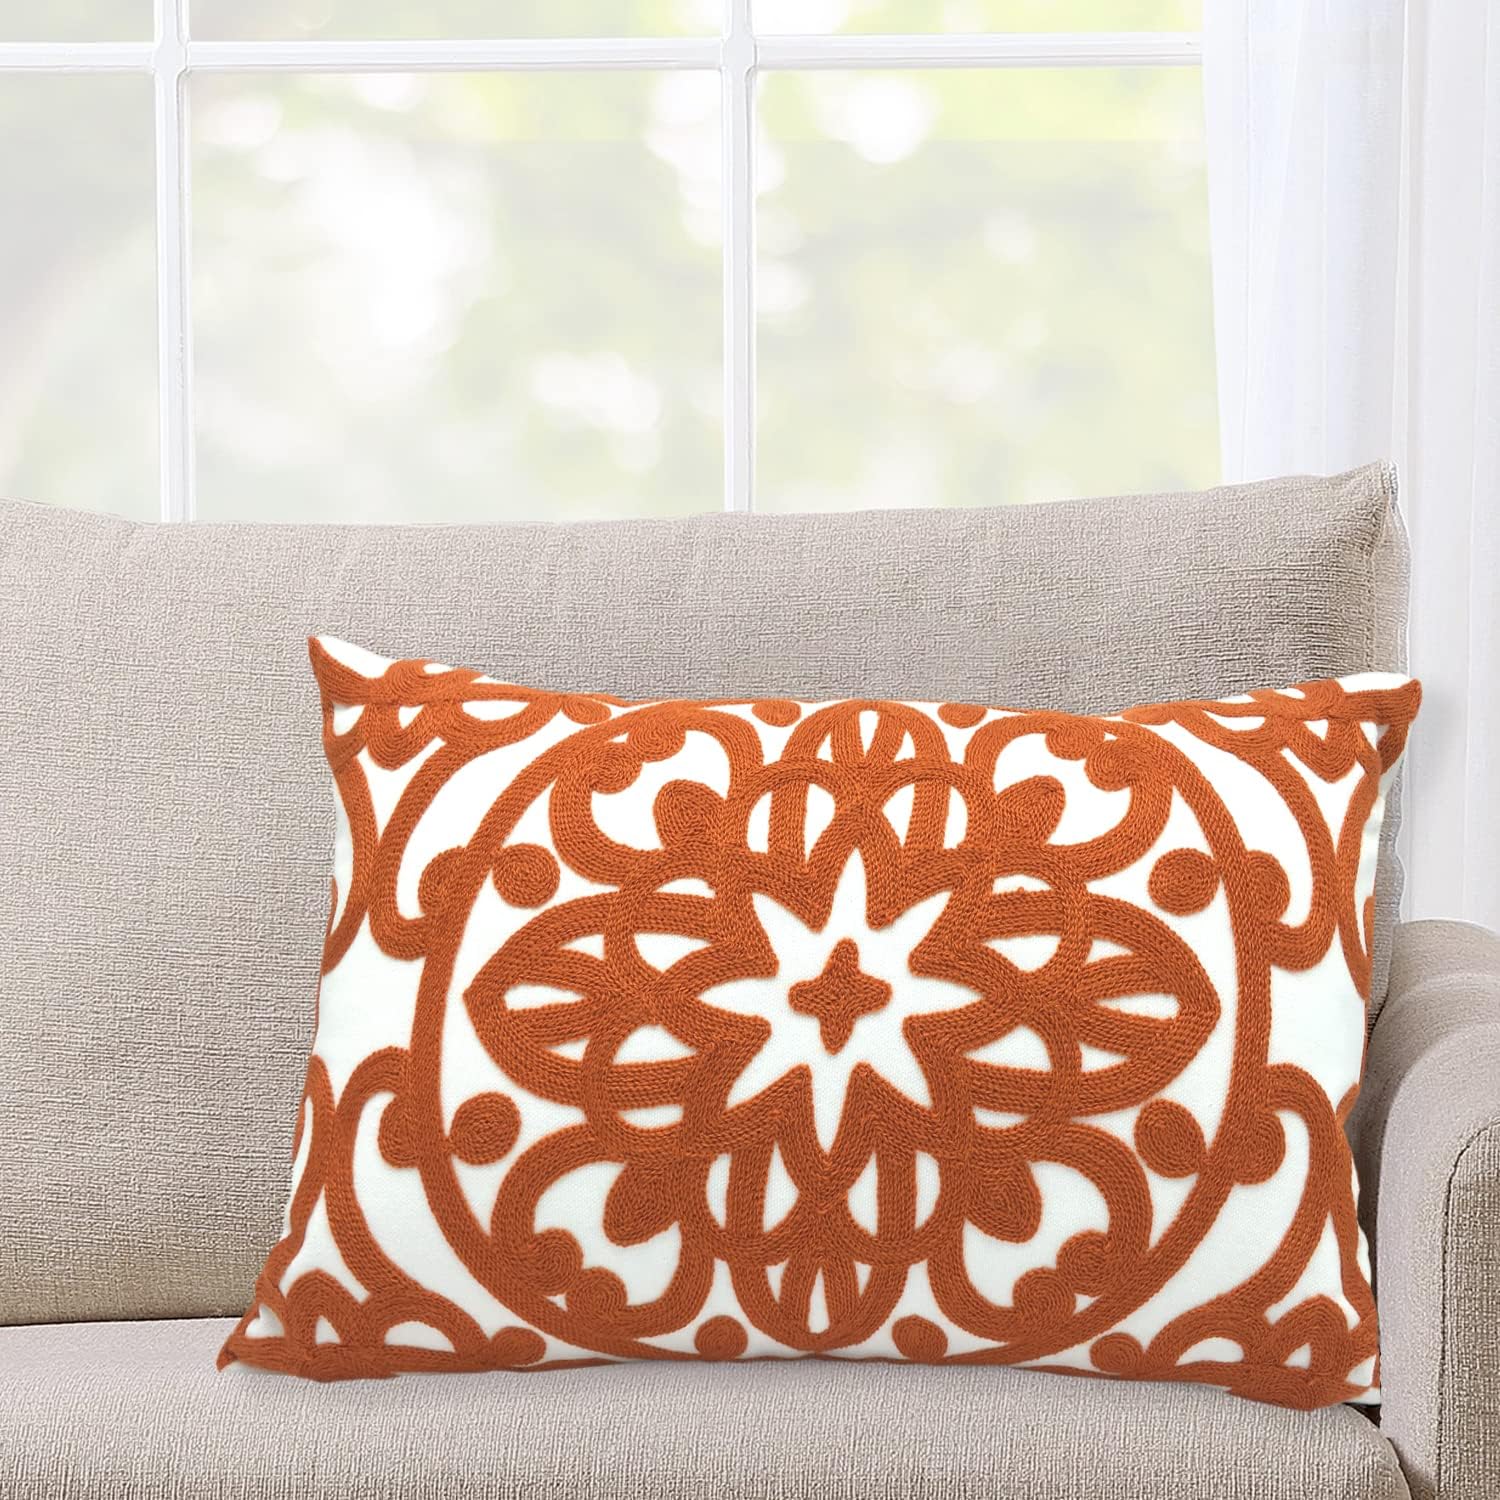 Enhance Your Home Decor with the Alysheer Embroidered Lumbar Decorative Throw Pillow Cover